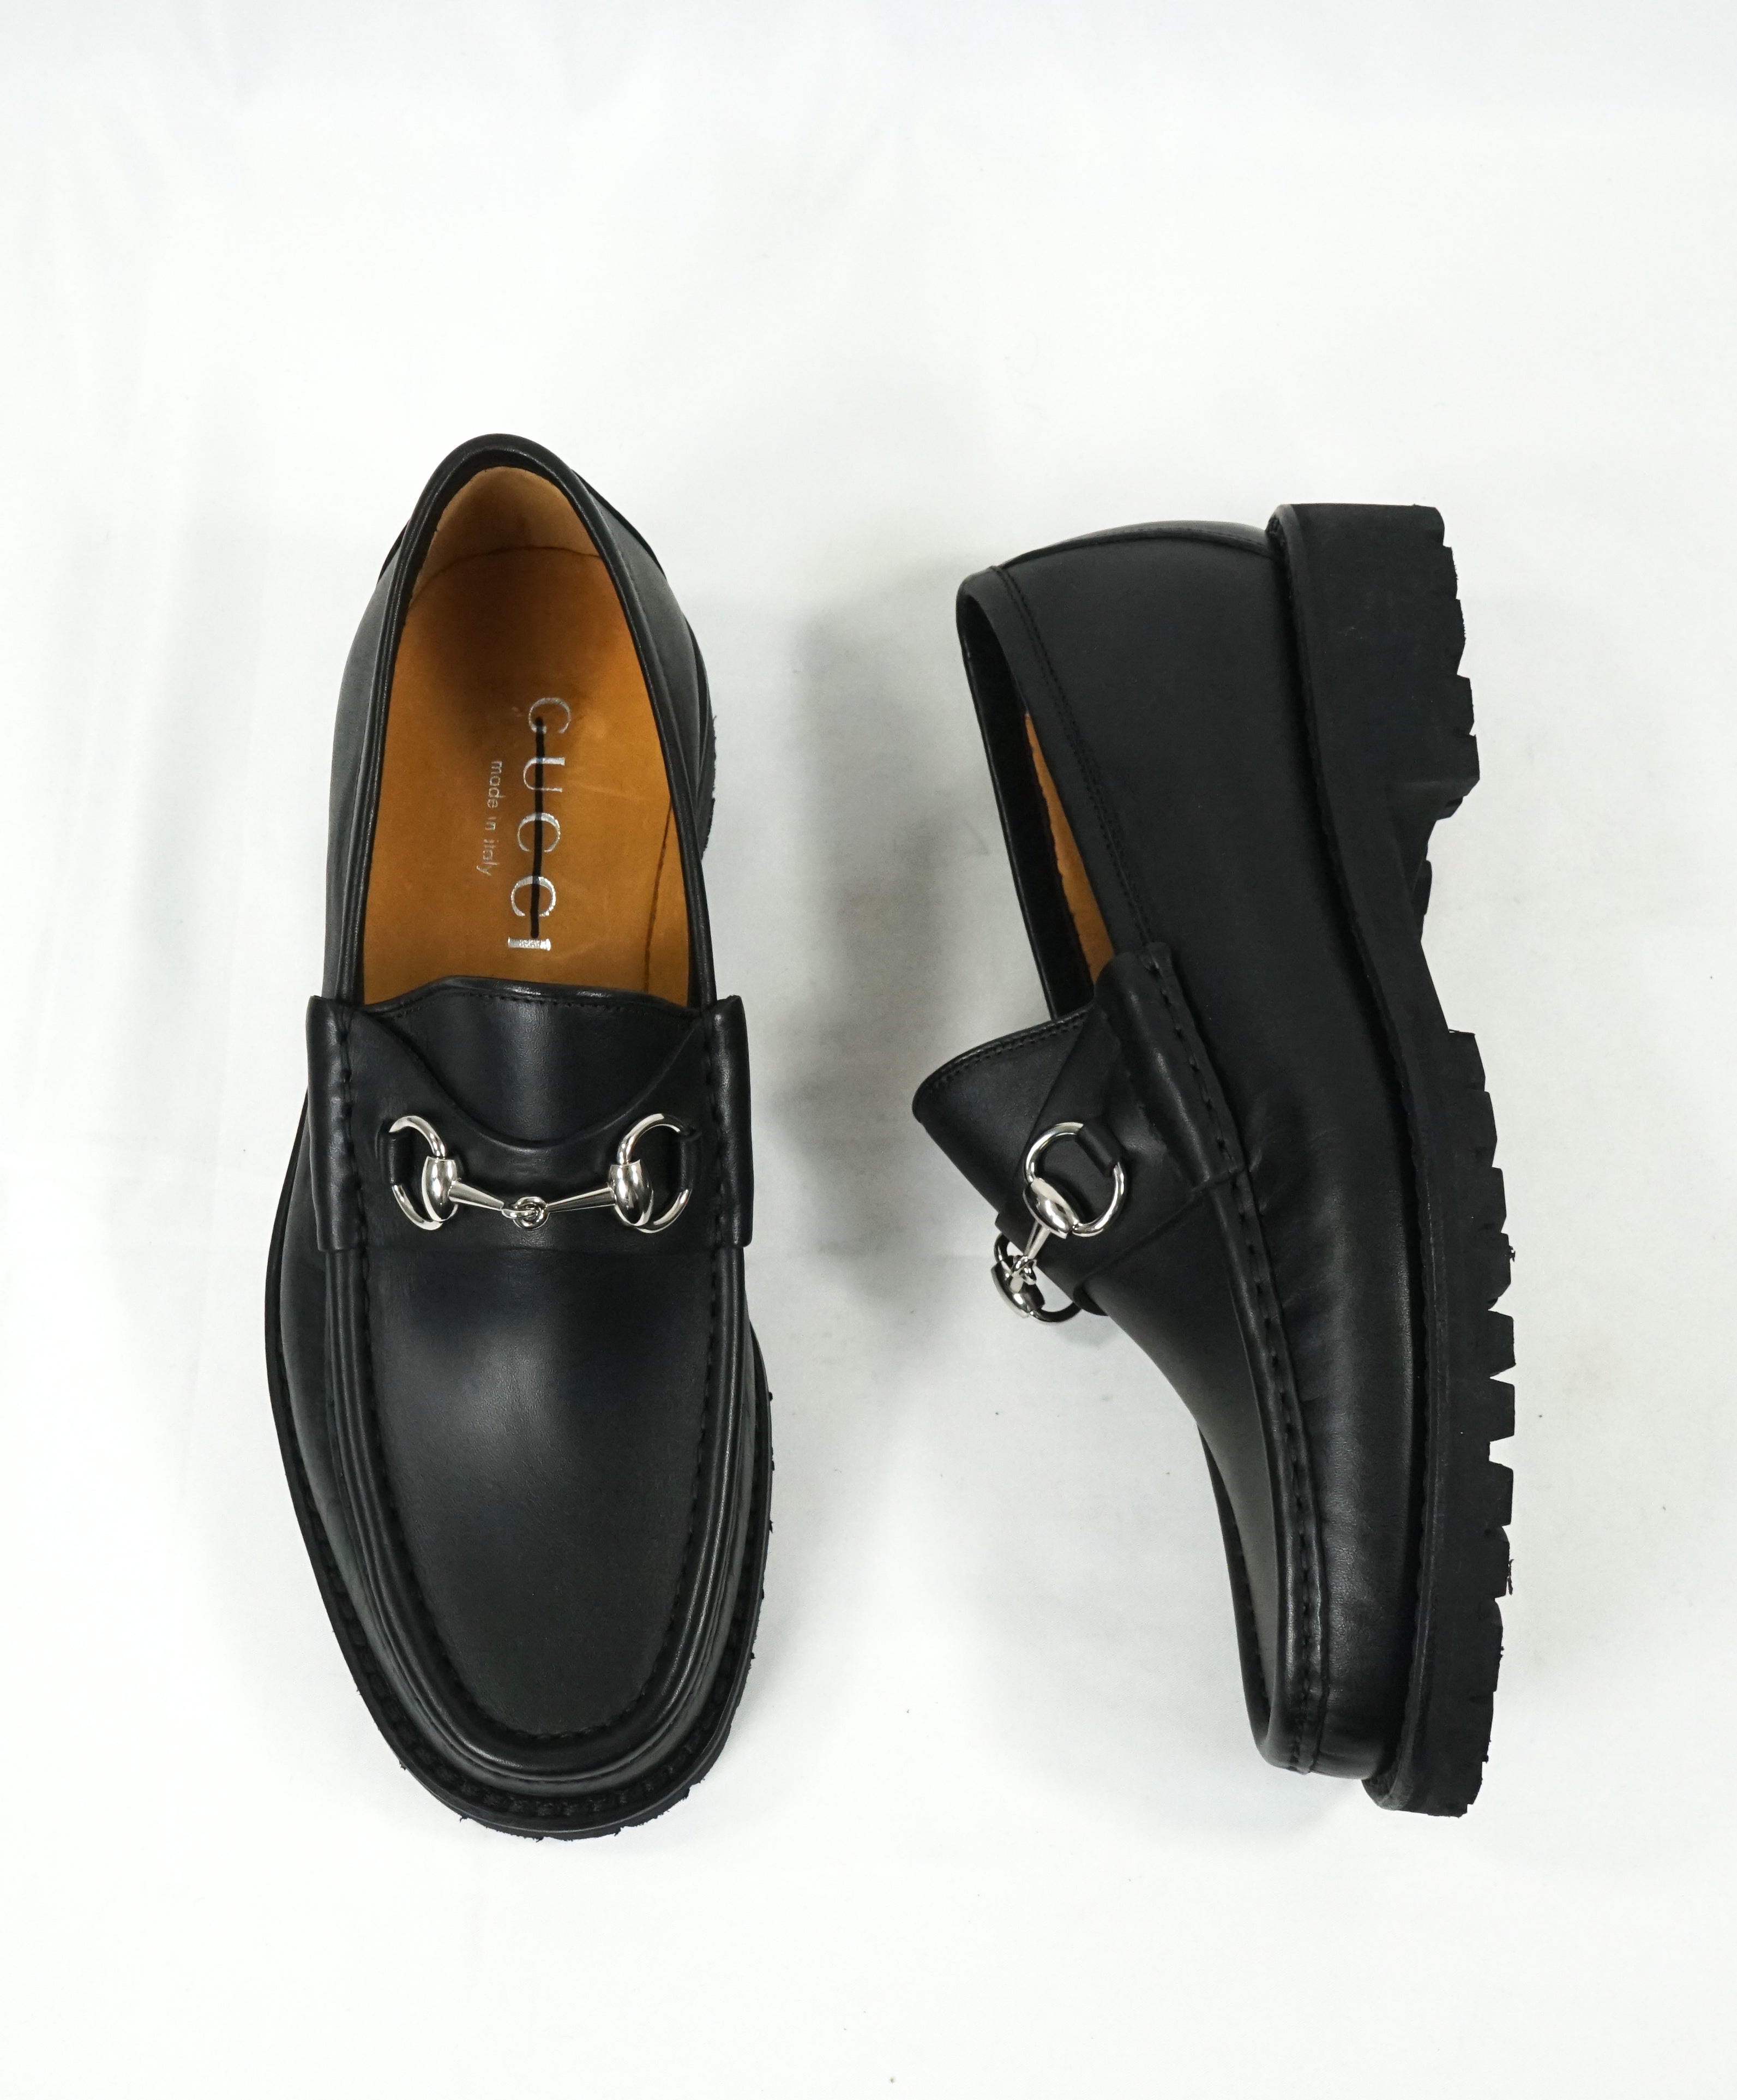 gucci lug sole loafer brown